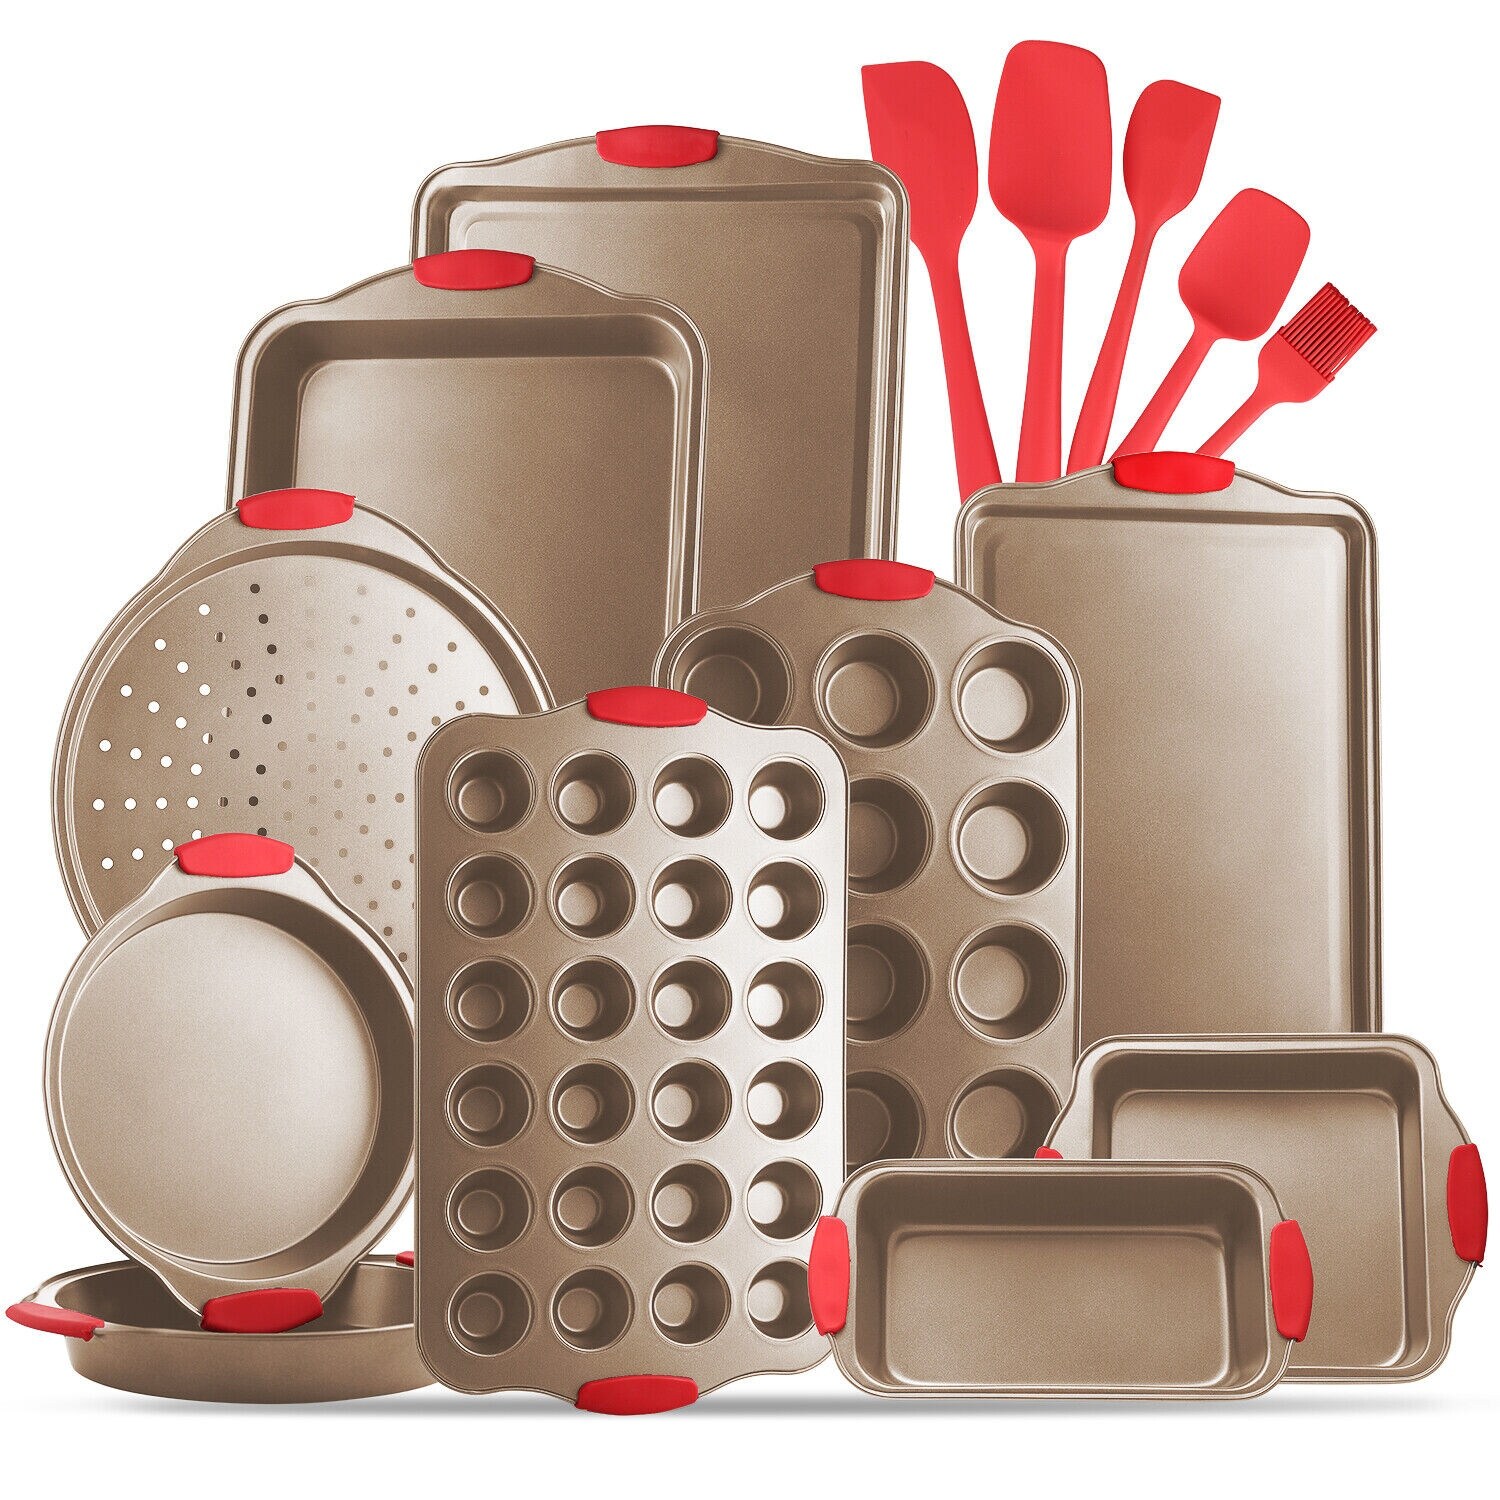 https://ak1.ostkcdn.com/images/products/is/images/direct/afc0aa1d1574a240839a5e168d4f7b5165090870/Light-Brown-15-Piece-Nonstick-Bakeware-Set-with-Silicone-Handles.jpg